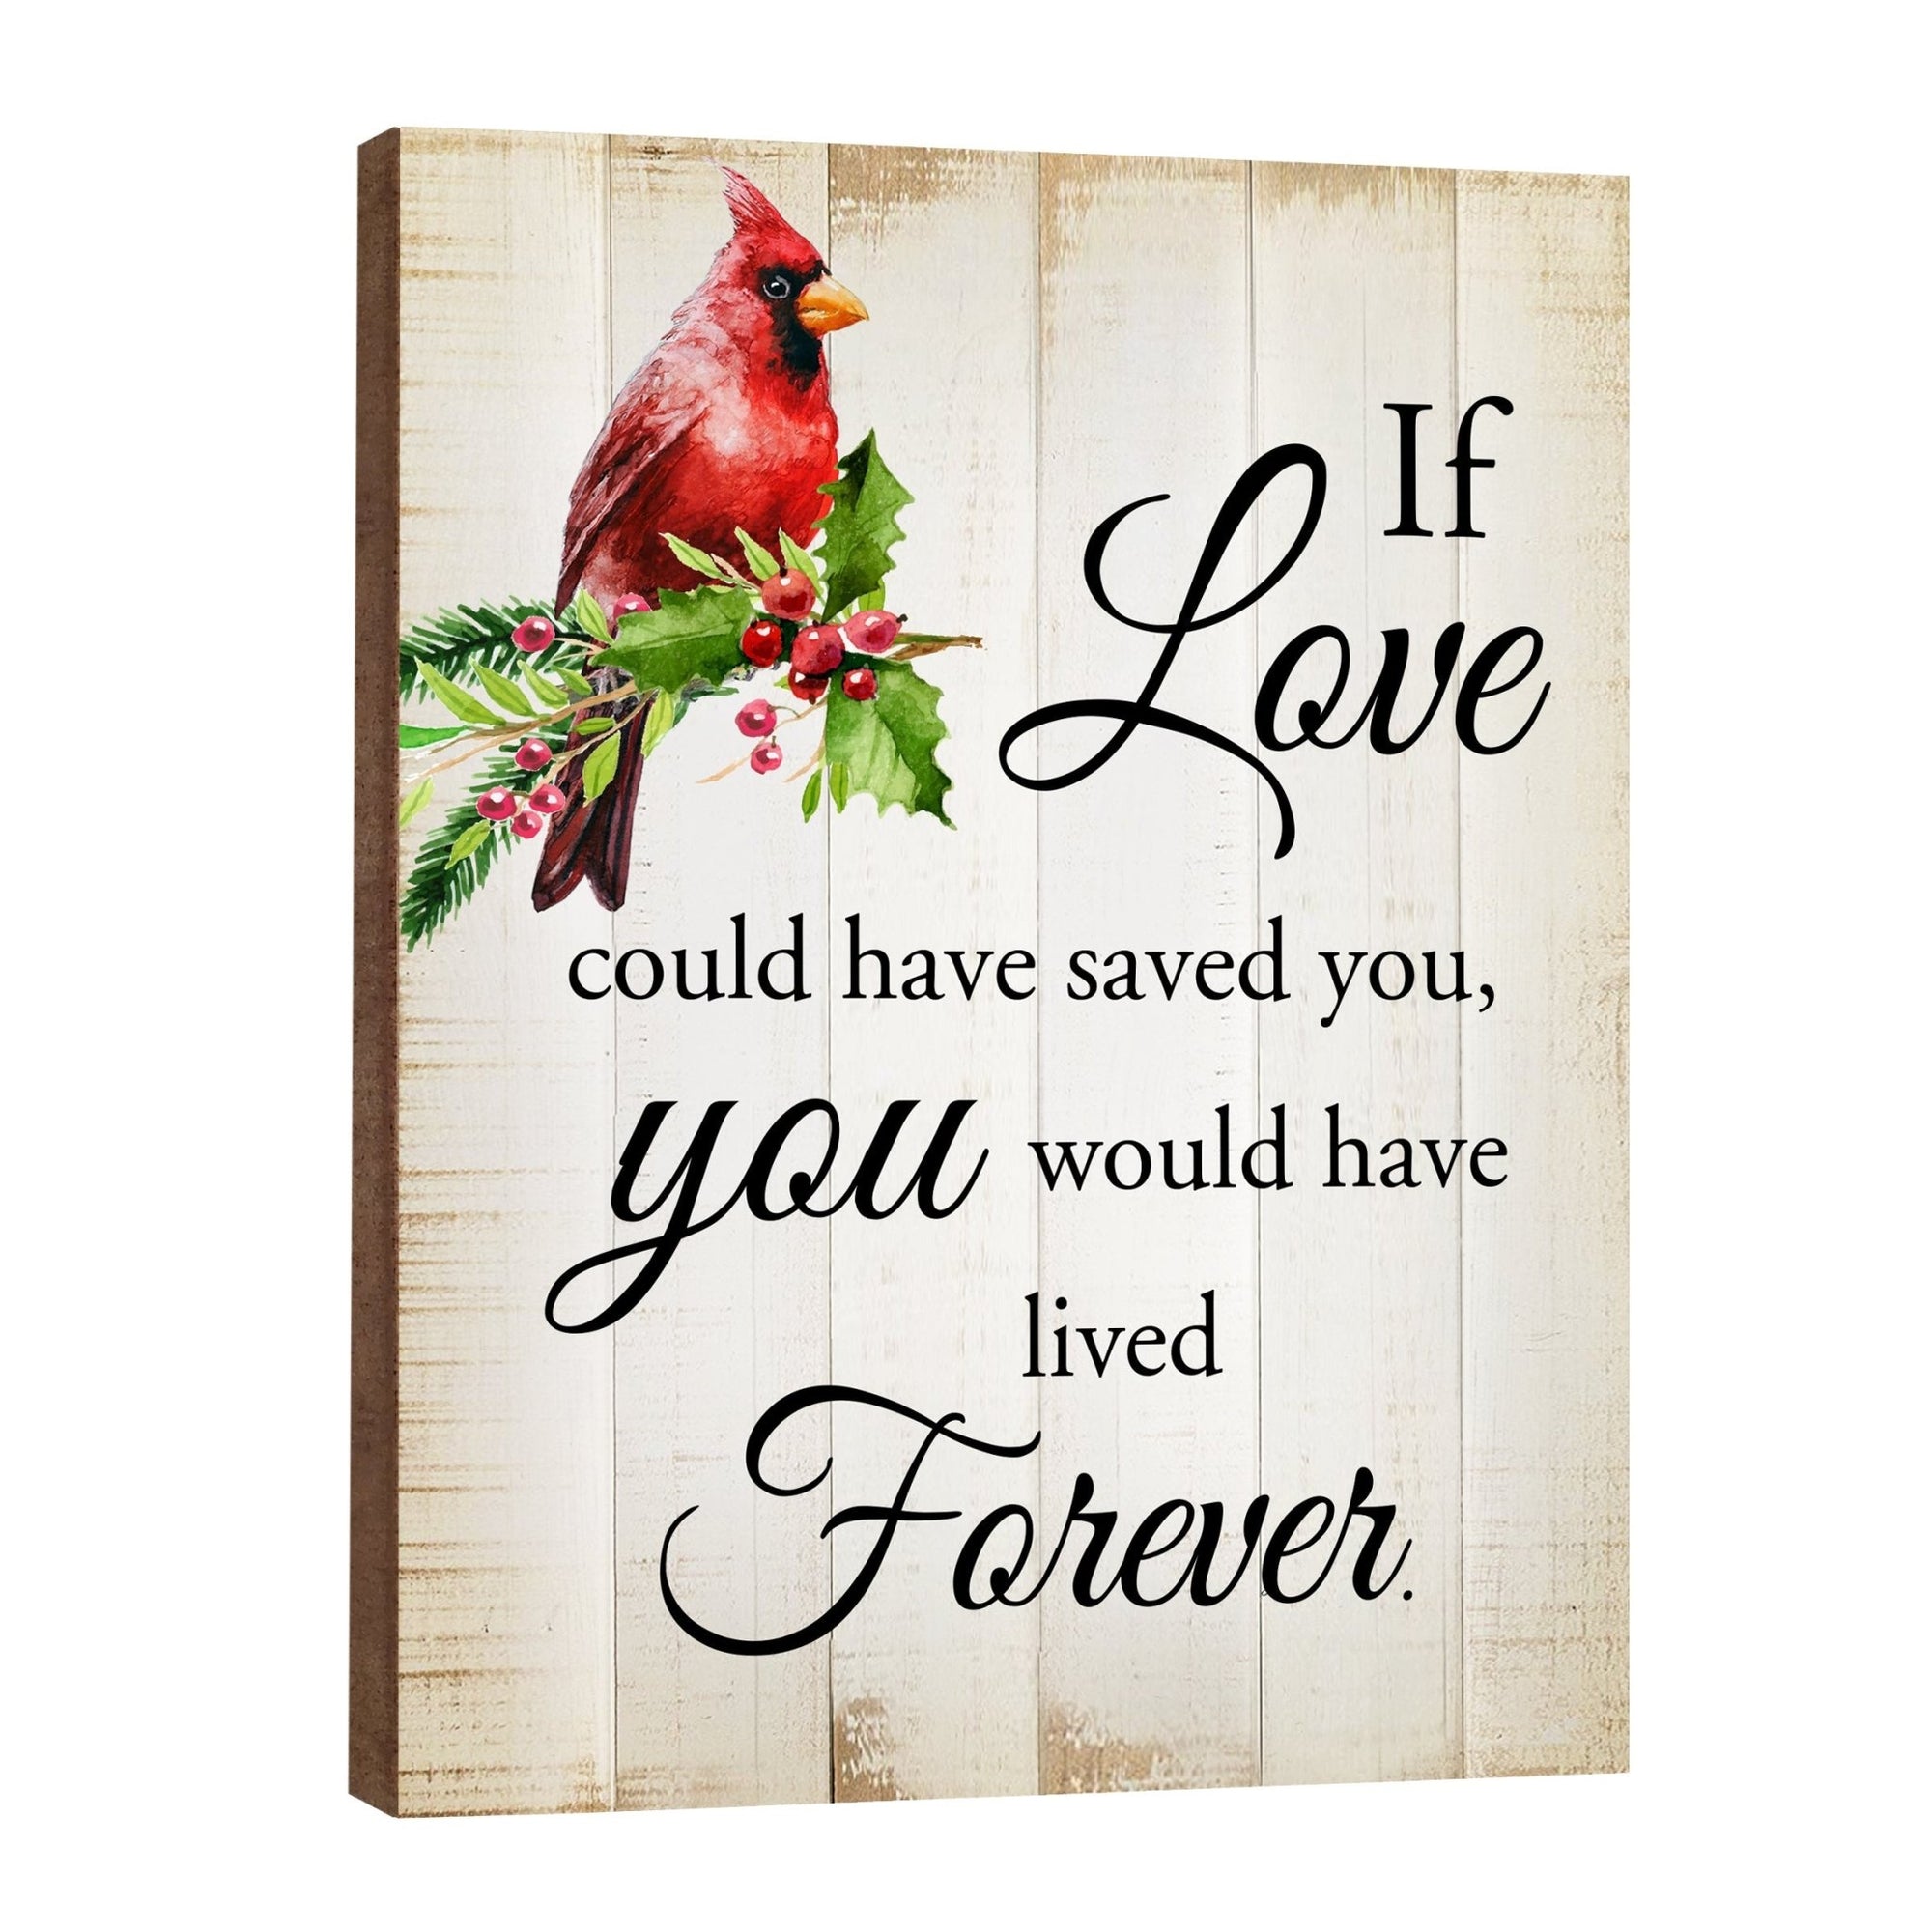 Cardinal-themed memorial decorations to keep the memory of your loved ones alive